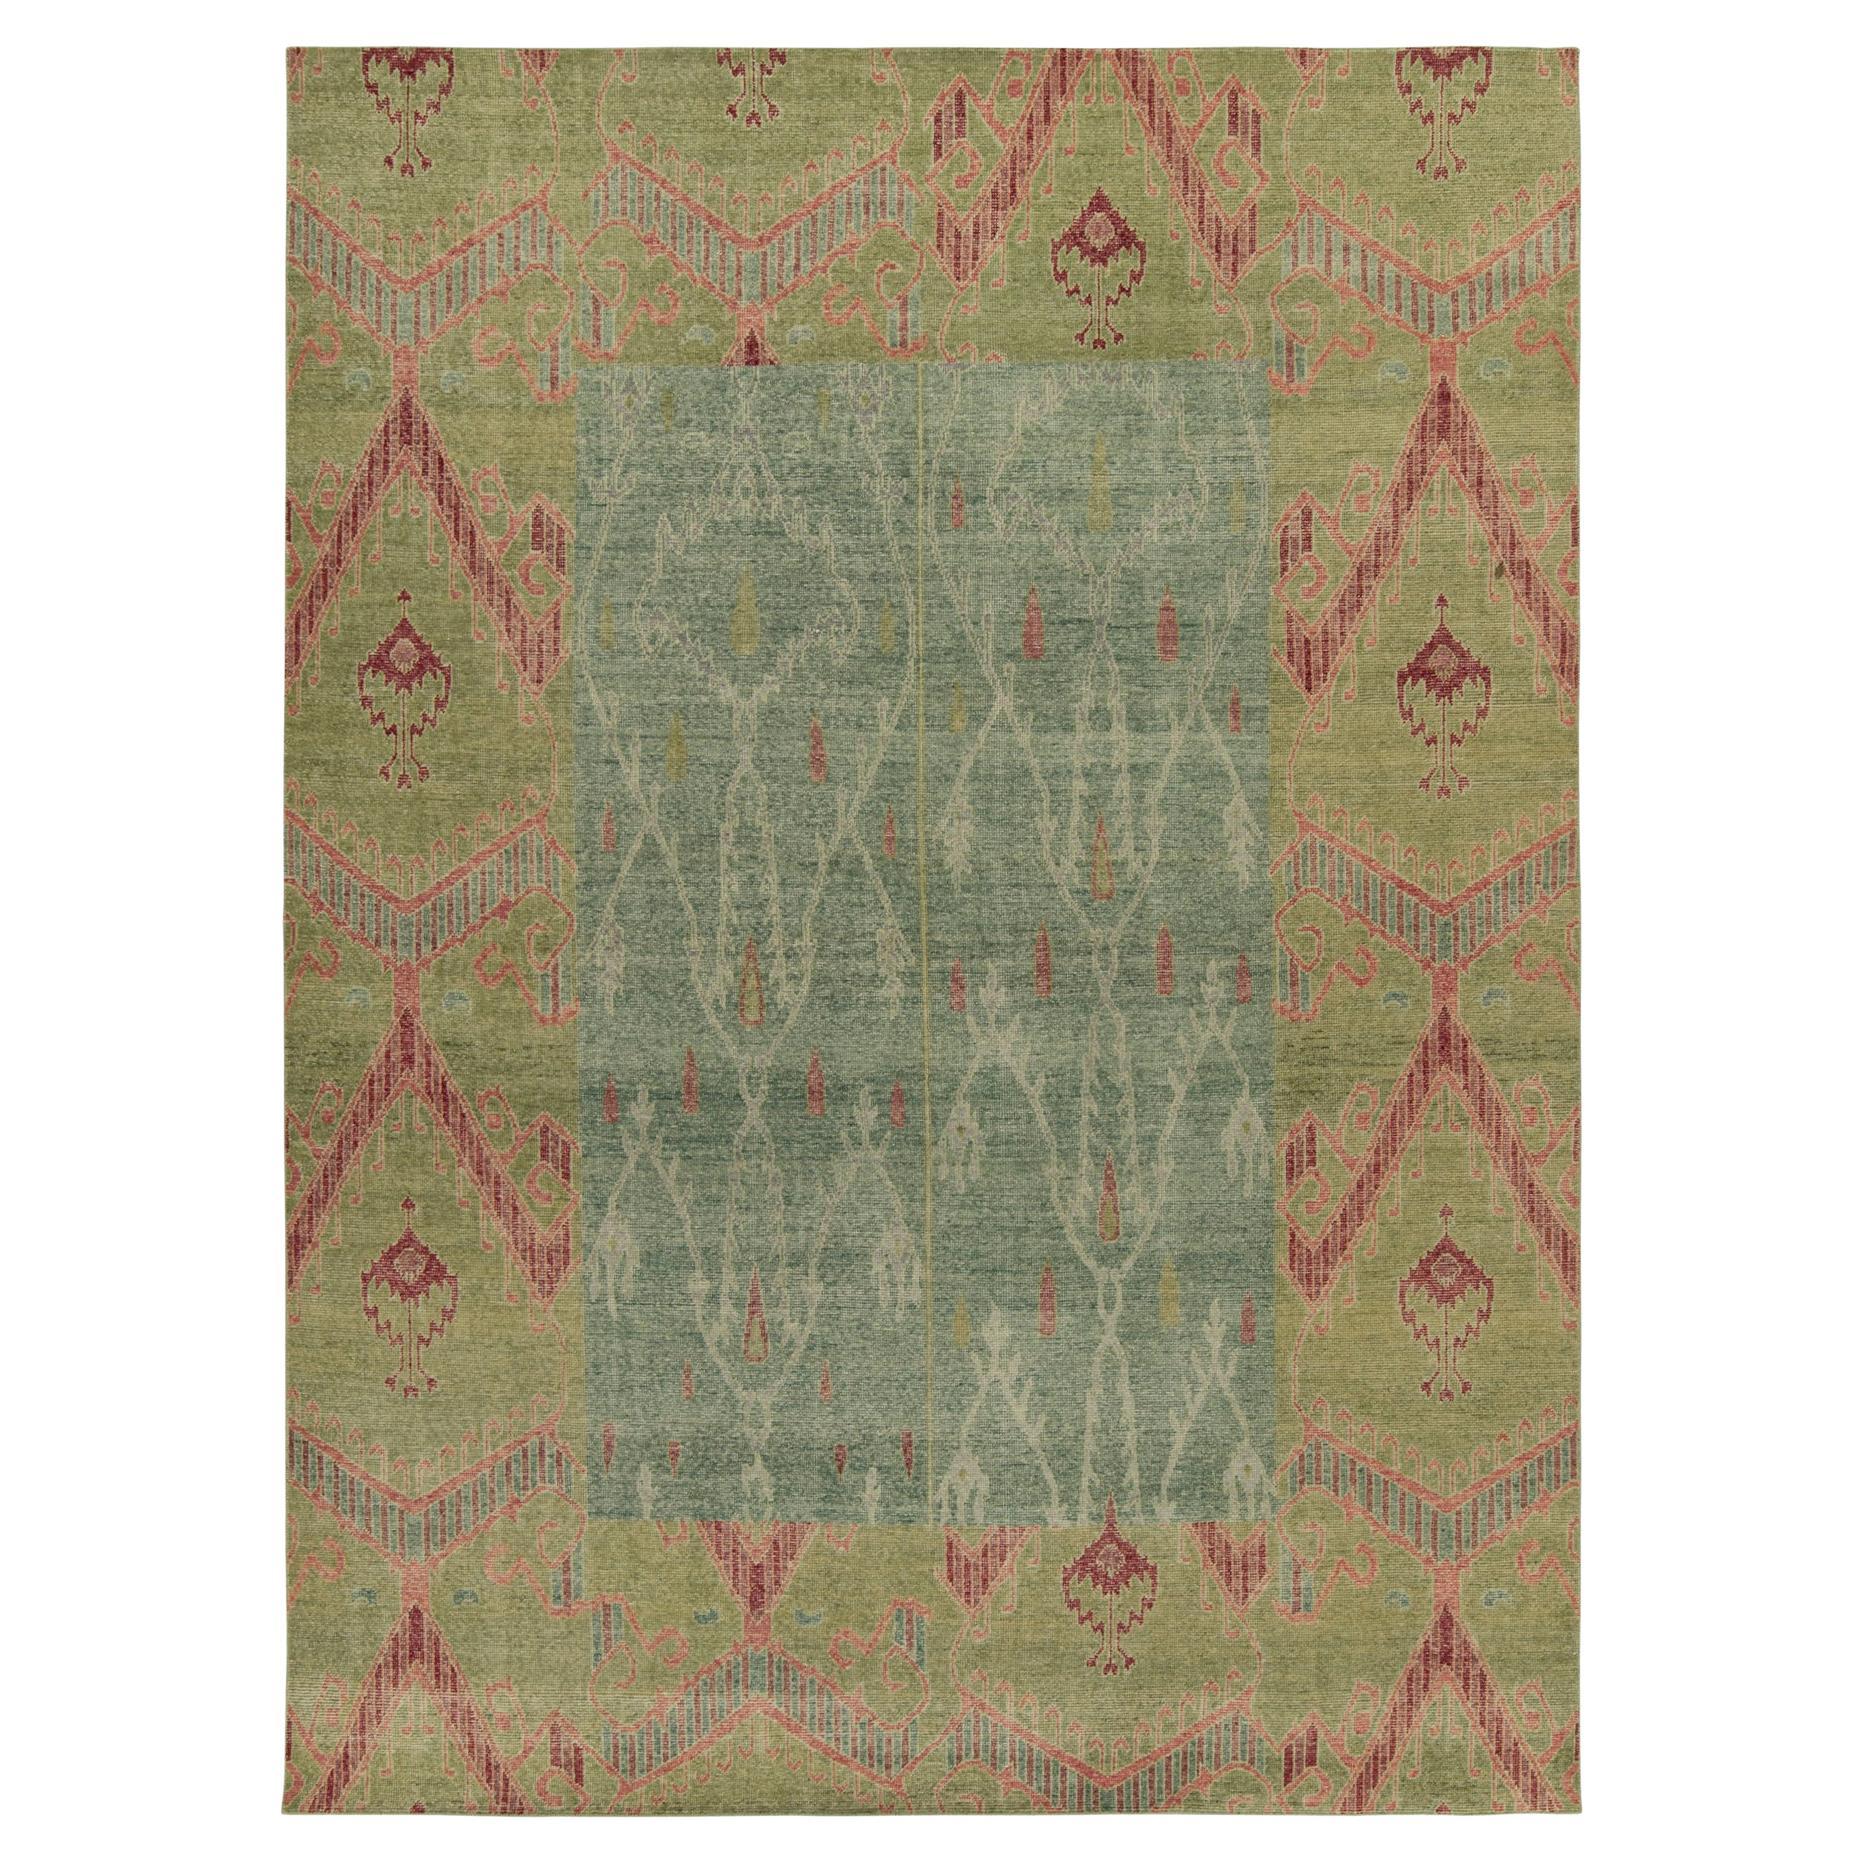 Rug & Kilim's Distressed Style Rug in Green, Blue and Red Ikats Pattern (Tapis à motifs Ikats verts, bleus et rouges)